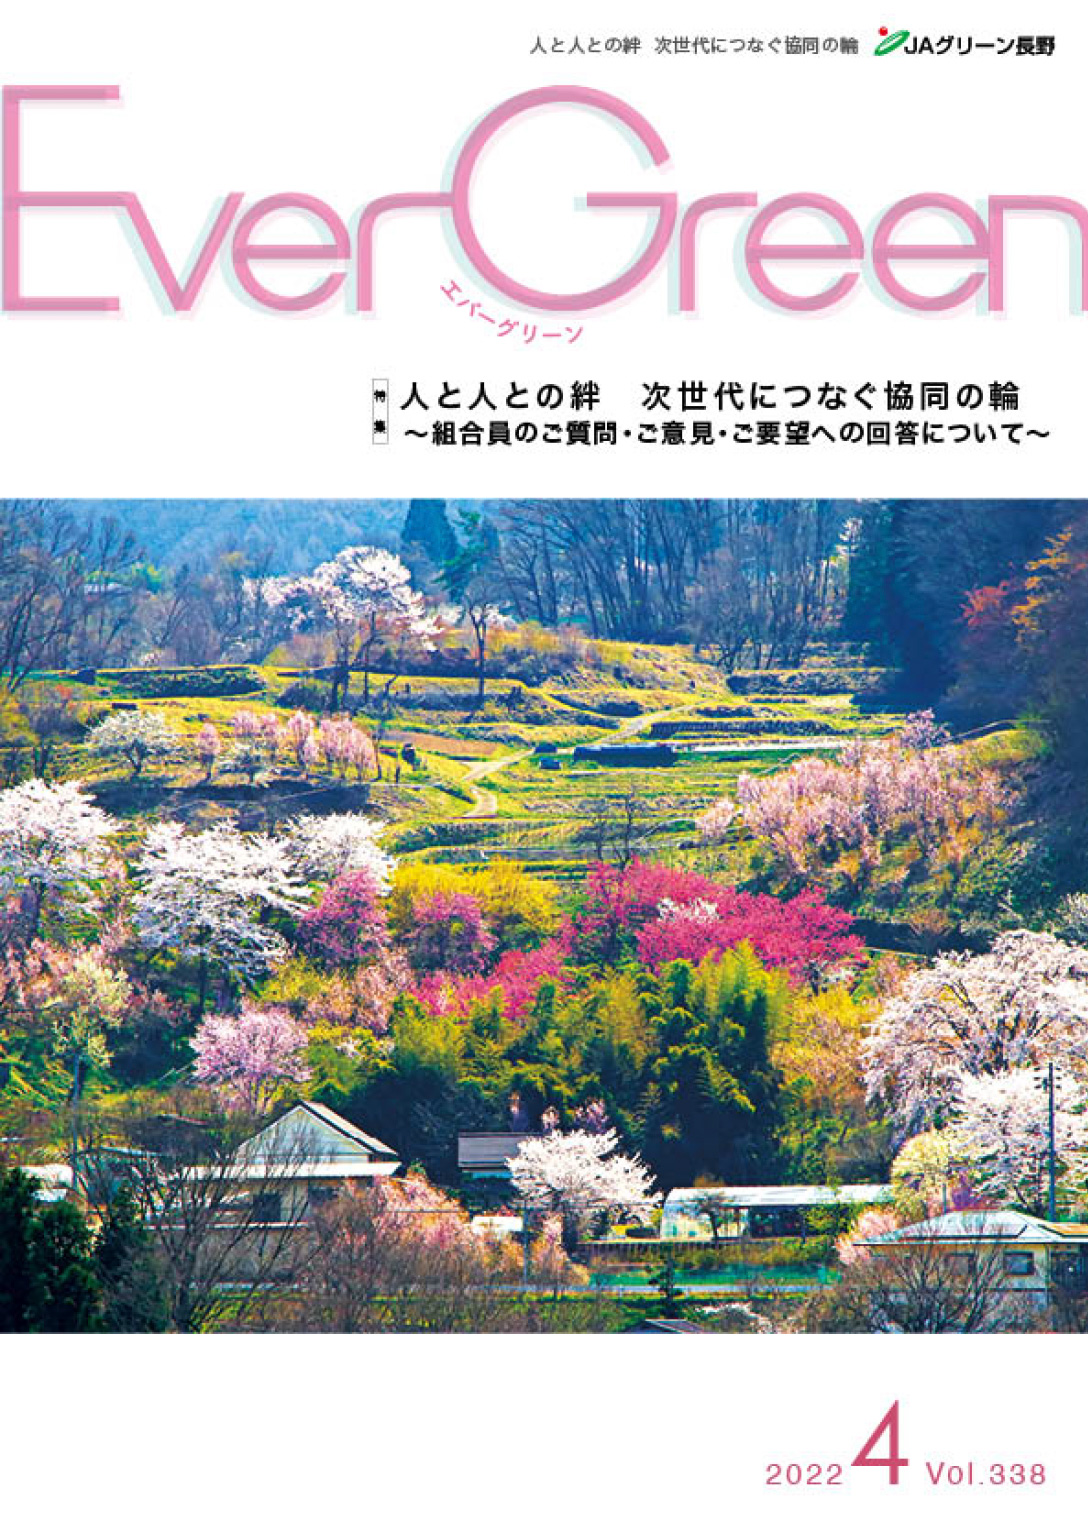 Ever Green4月号発行のご案内